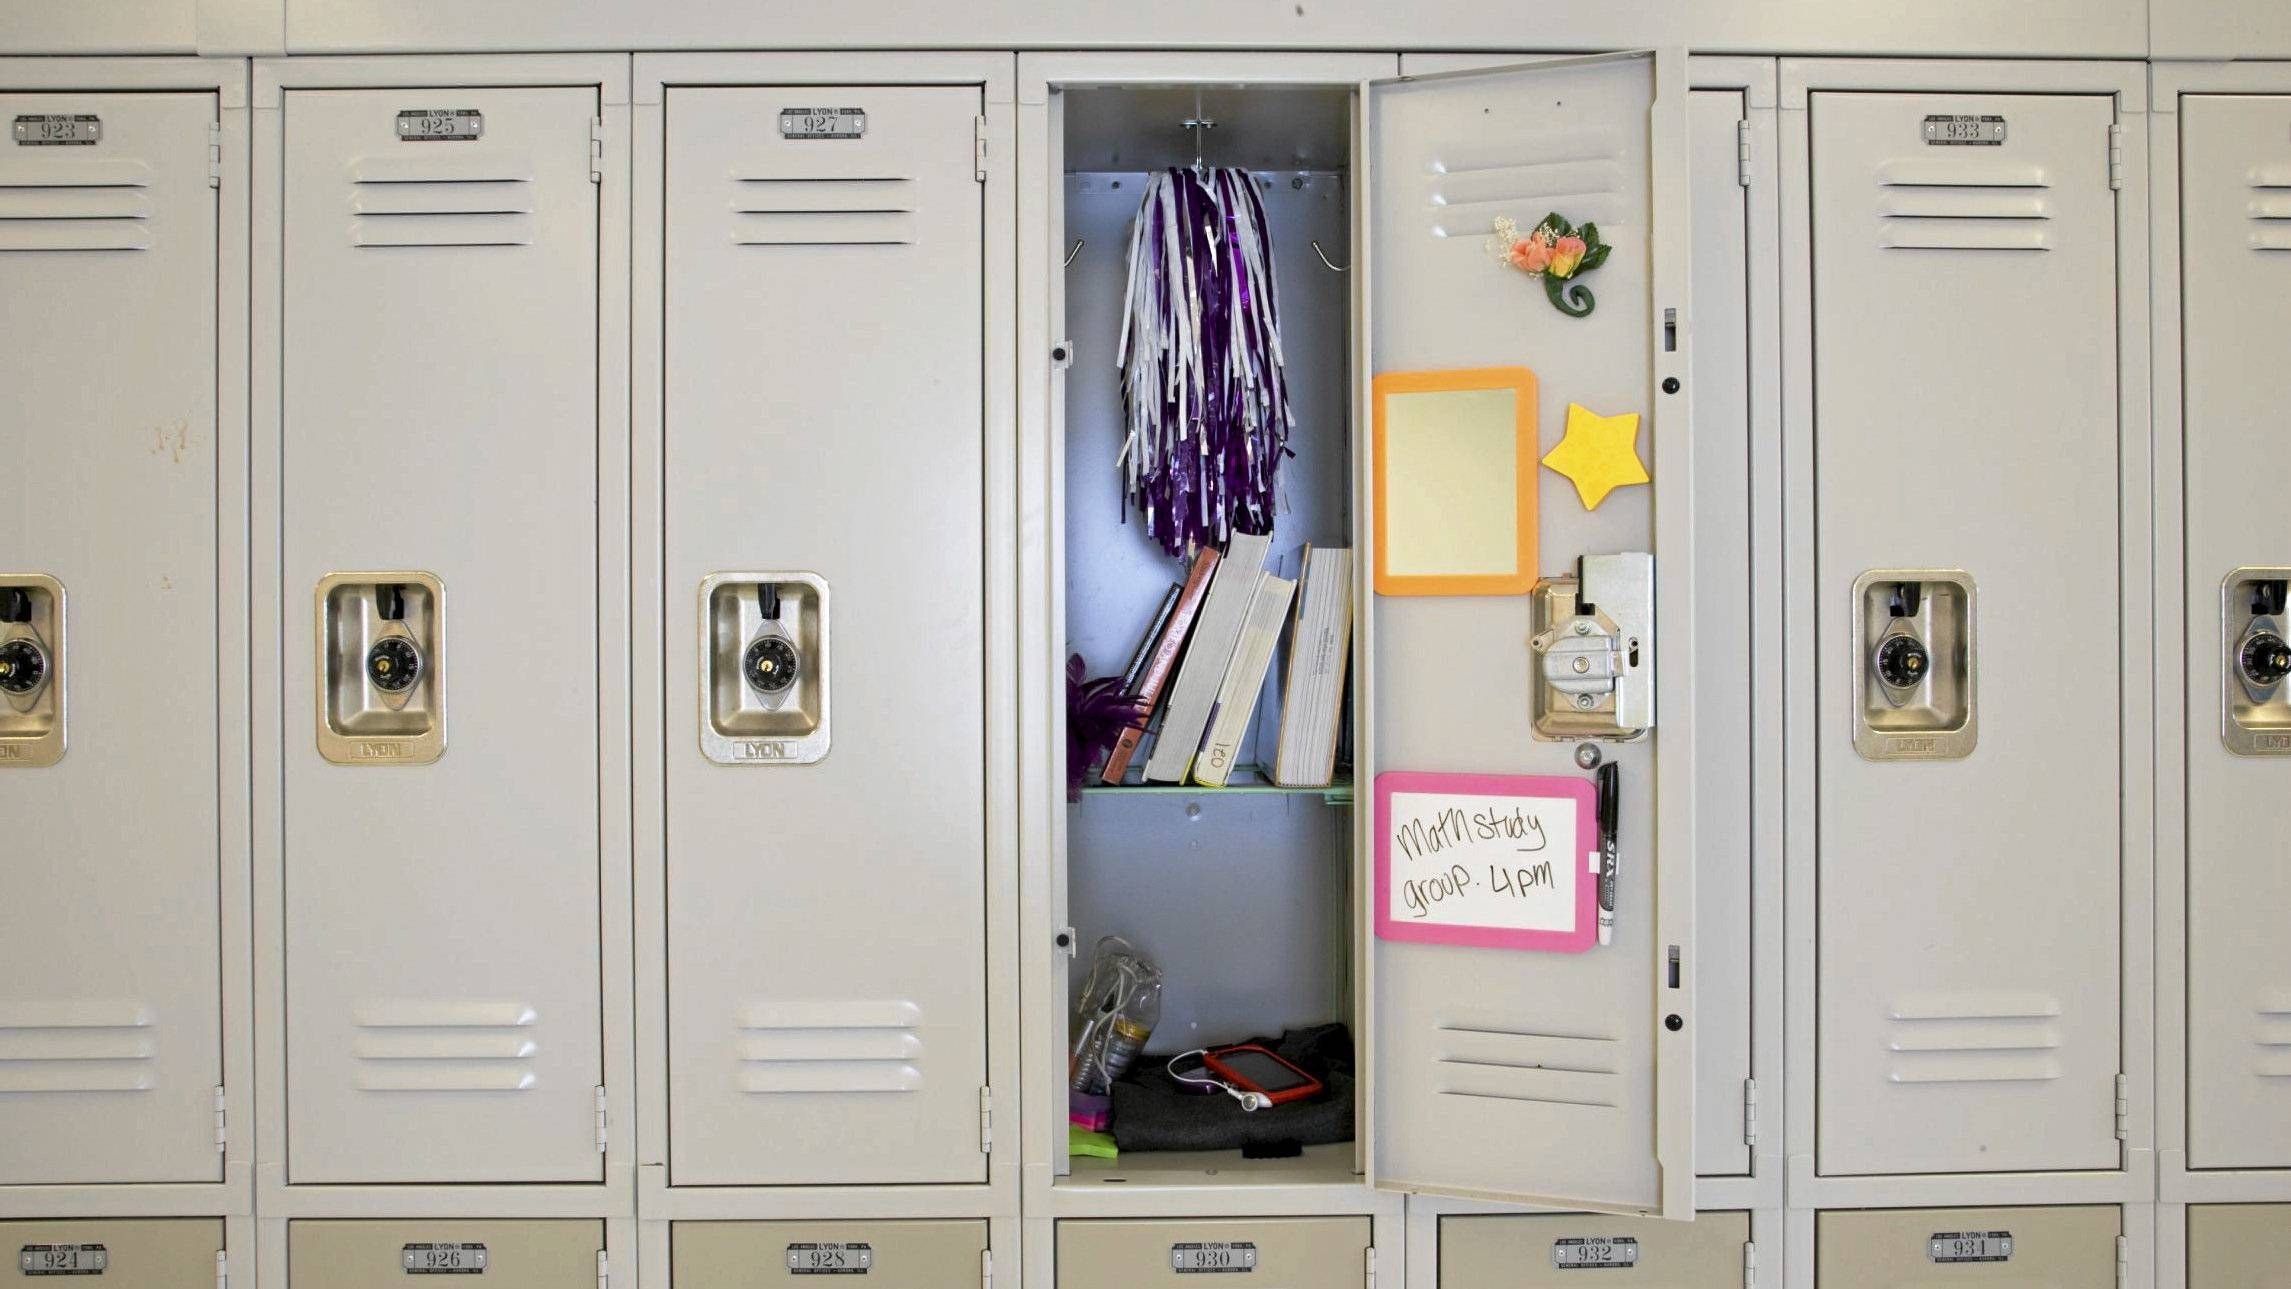 2291x1289 The new middle school status symbol: Locker accessories - The Globe and Mail